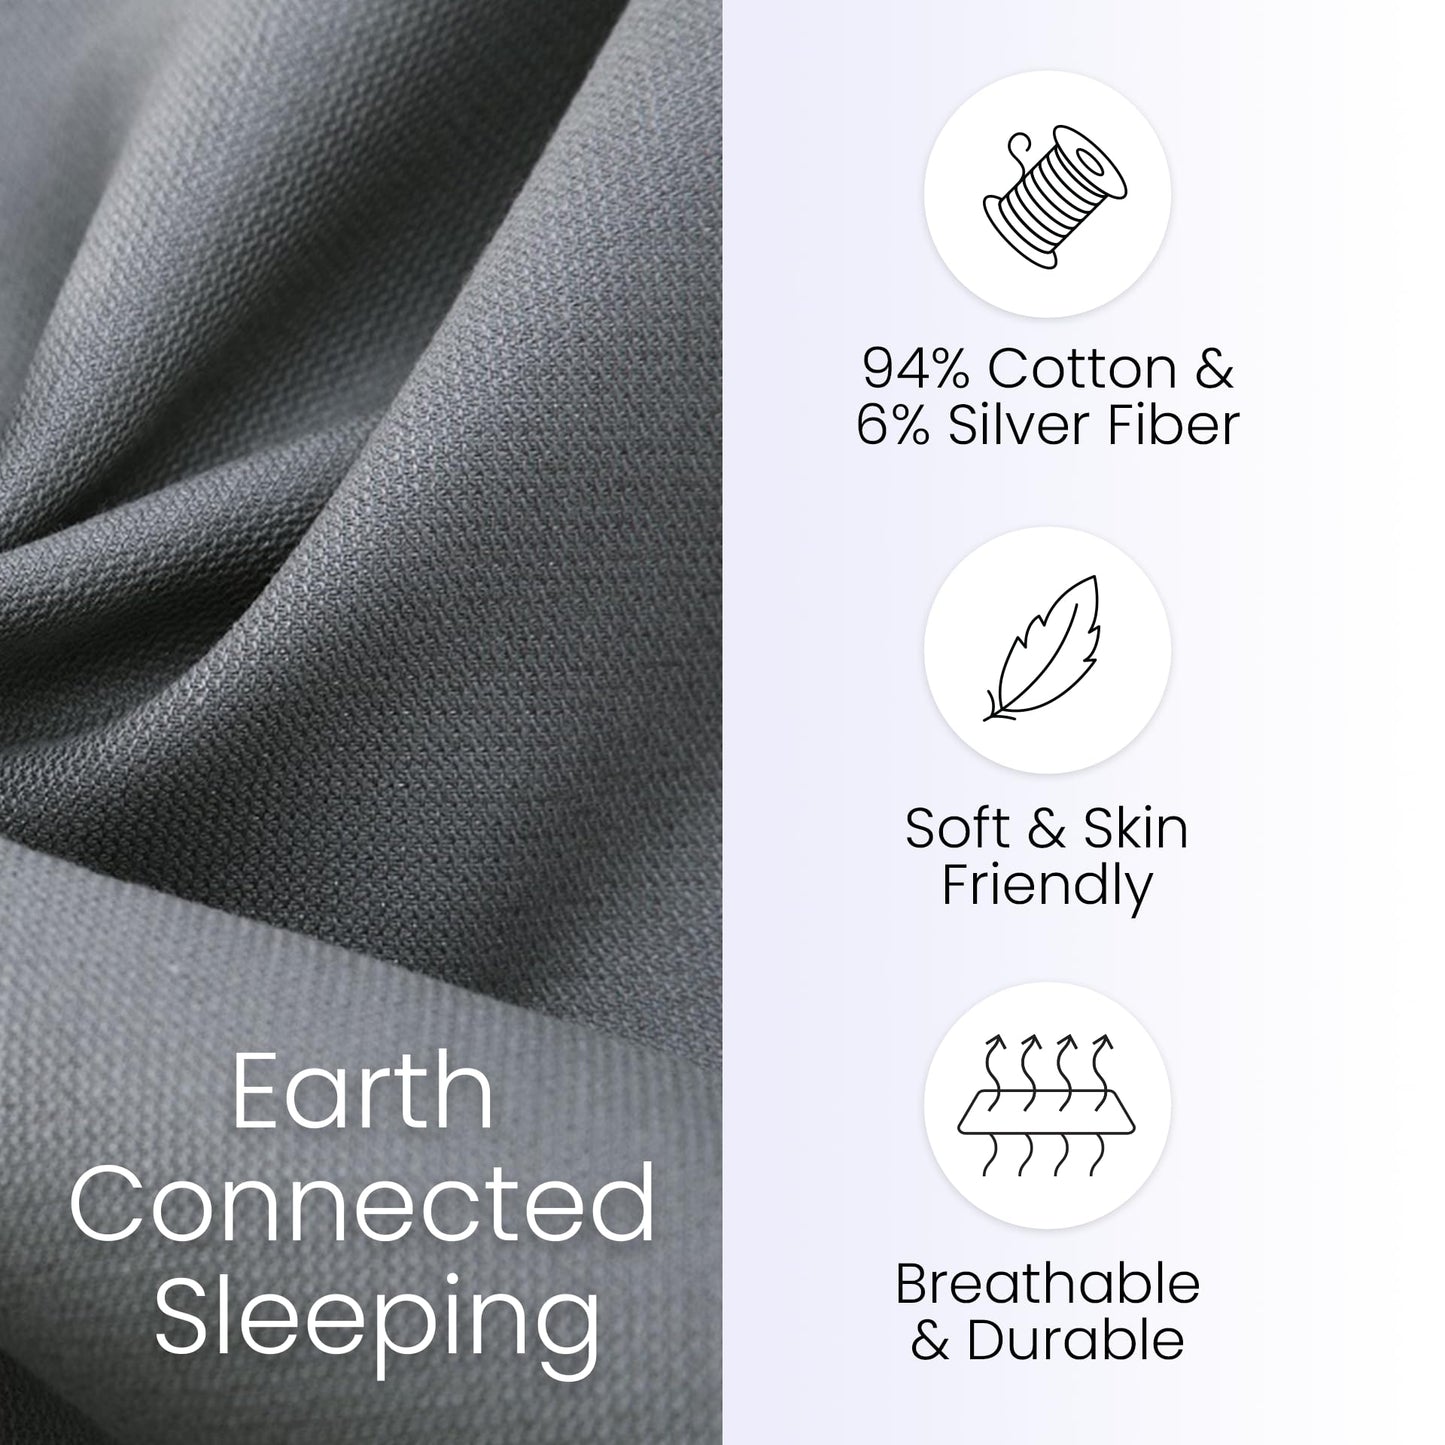 Hooga Grounding Sheet, Organic Fitted Grounded Sheet for Improved Sleep, Pain Relief - Earth Connected Bedding 78”x80”x15” King Size, Pure Silver Fiber and Cotton, Grounding Cord Included